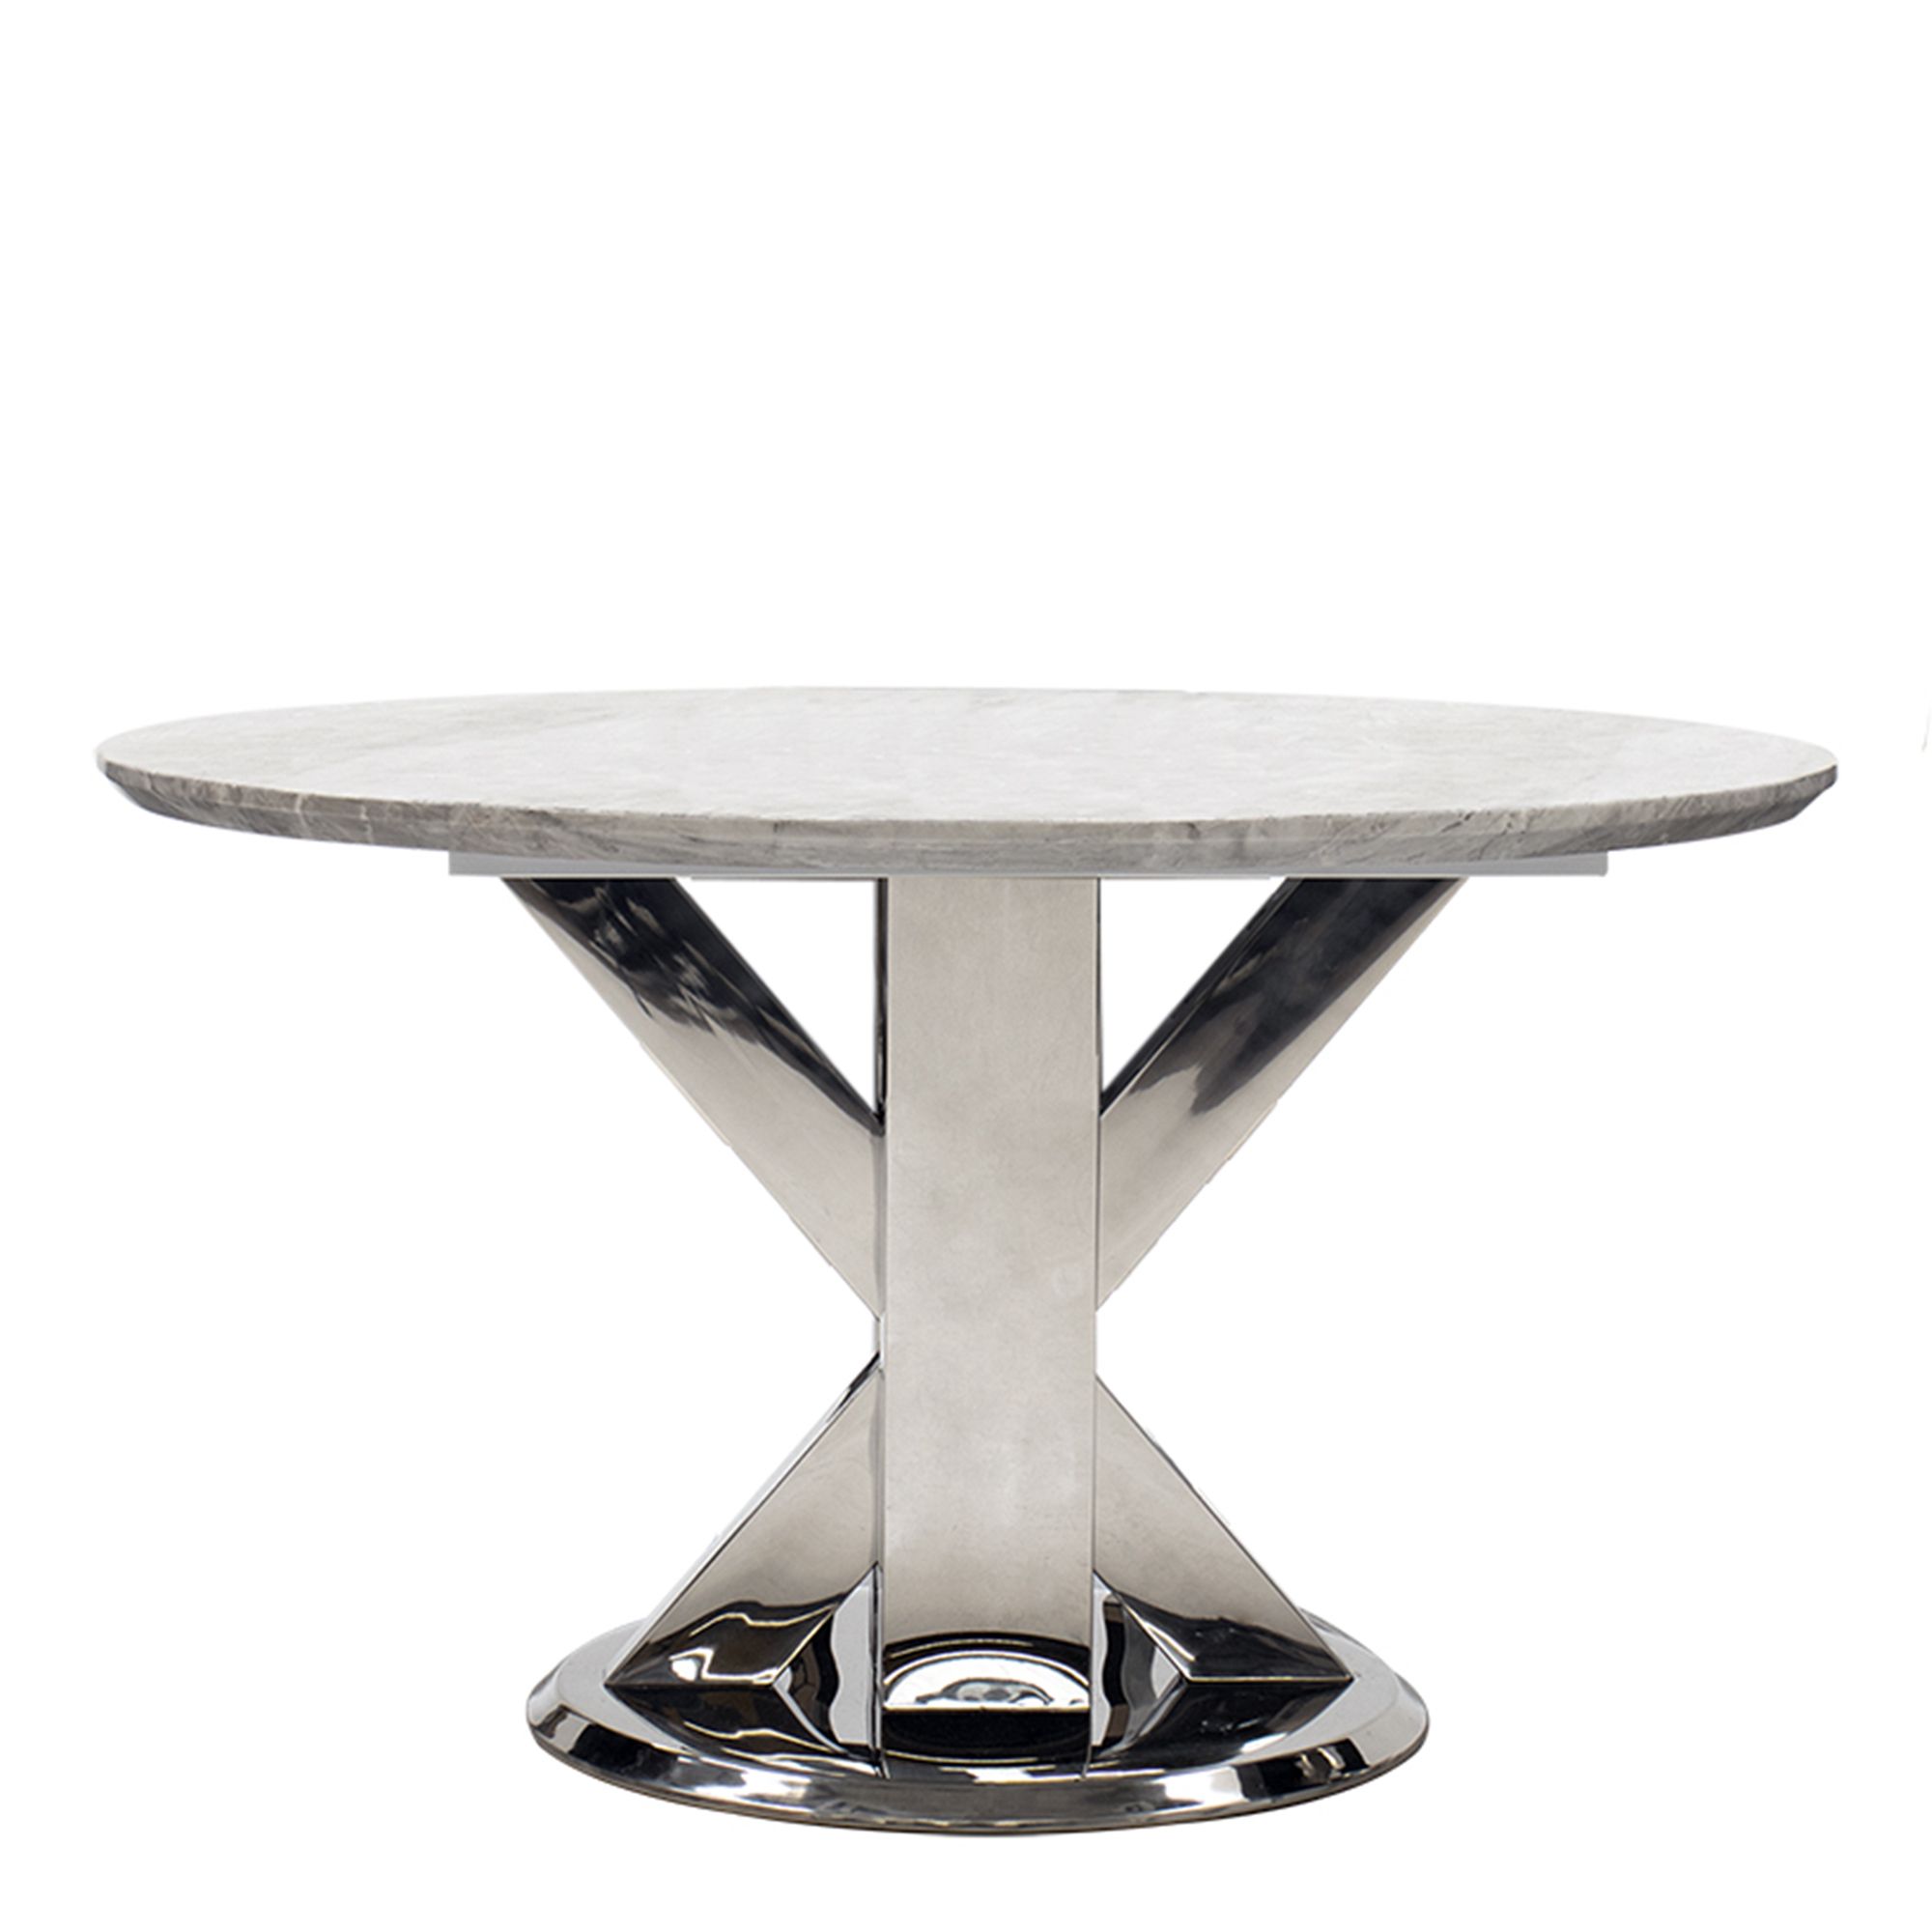 Azaro – 130cm Round Dining Table Grey Marble Top With Chrome Finish Throughout Polished Chrome Round Console Tables (View 15 of 20)